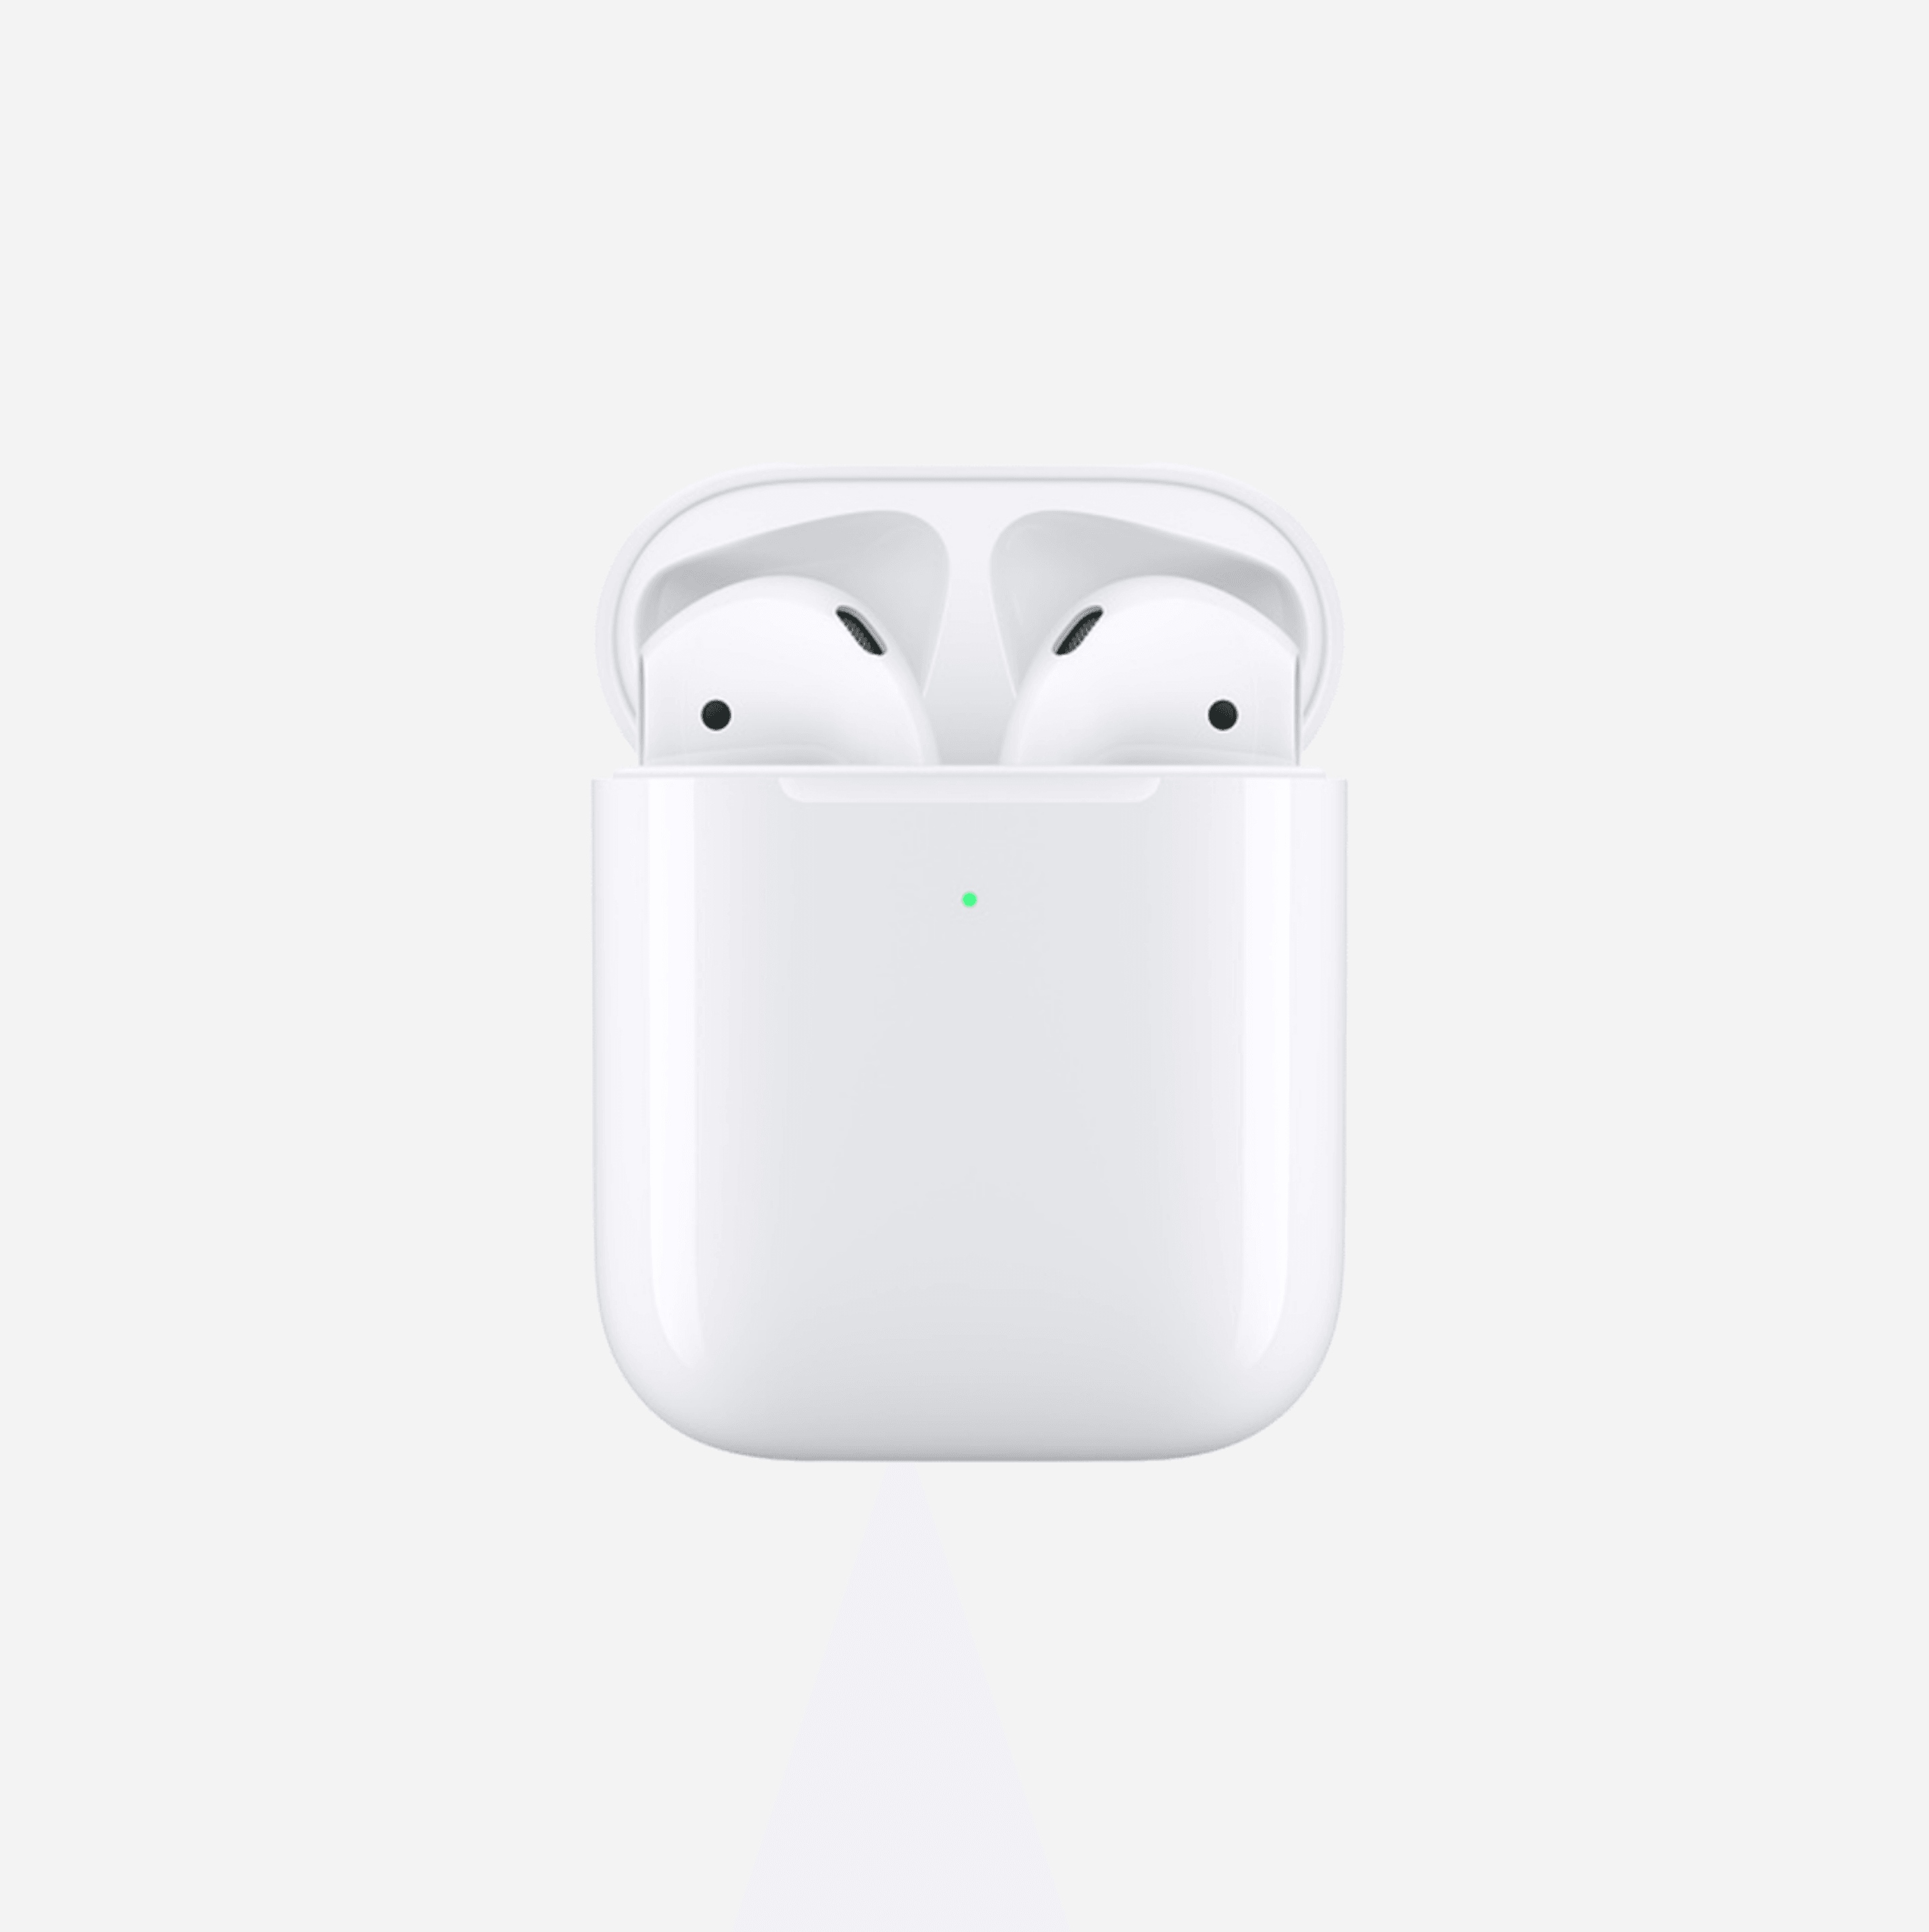 Apple AirPods Generation 2 with Wireless Charging Case - Refurbished - Refurb Me